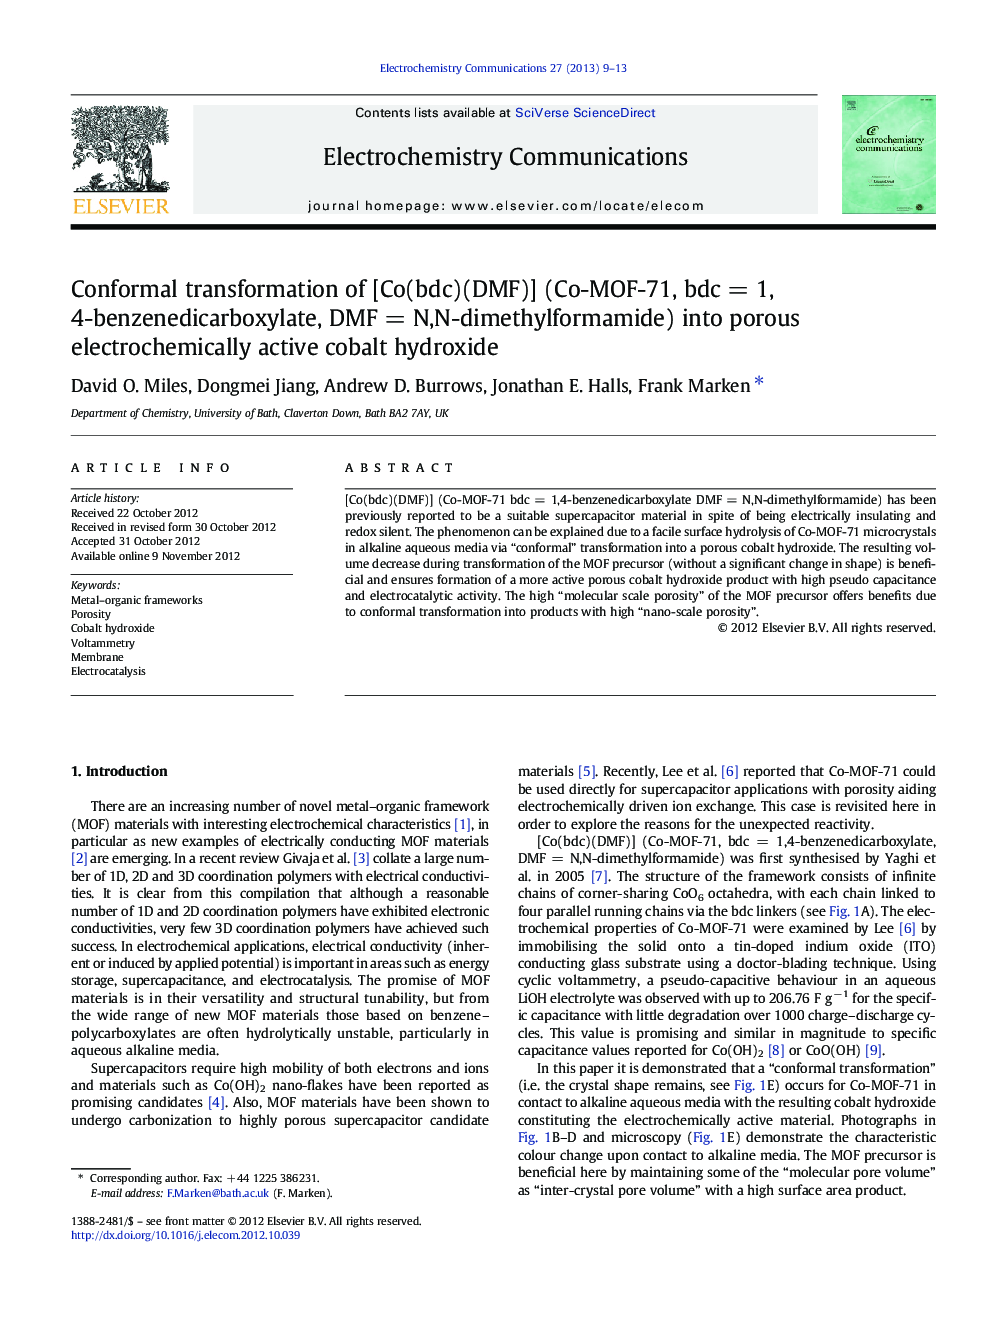 Conformal transformation of [Co(bdc)(DMF)] (Co-MOF-71, bdc = 1,4-benzenedicarboxylate, DMF = N,N-dimethylformamide) into porous electrochemically active cobalt hydroxide